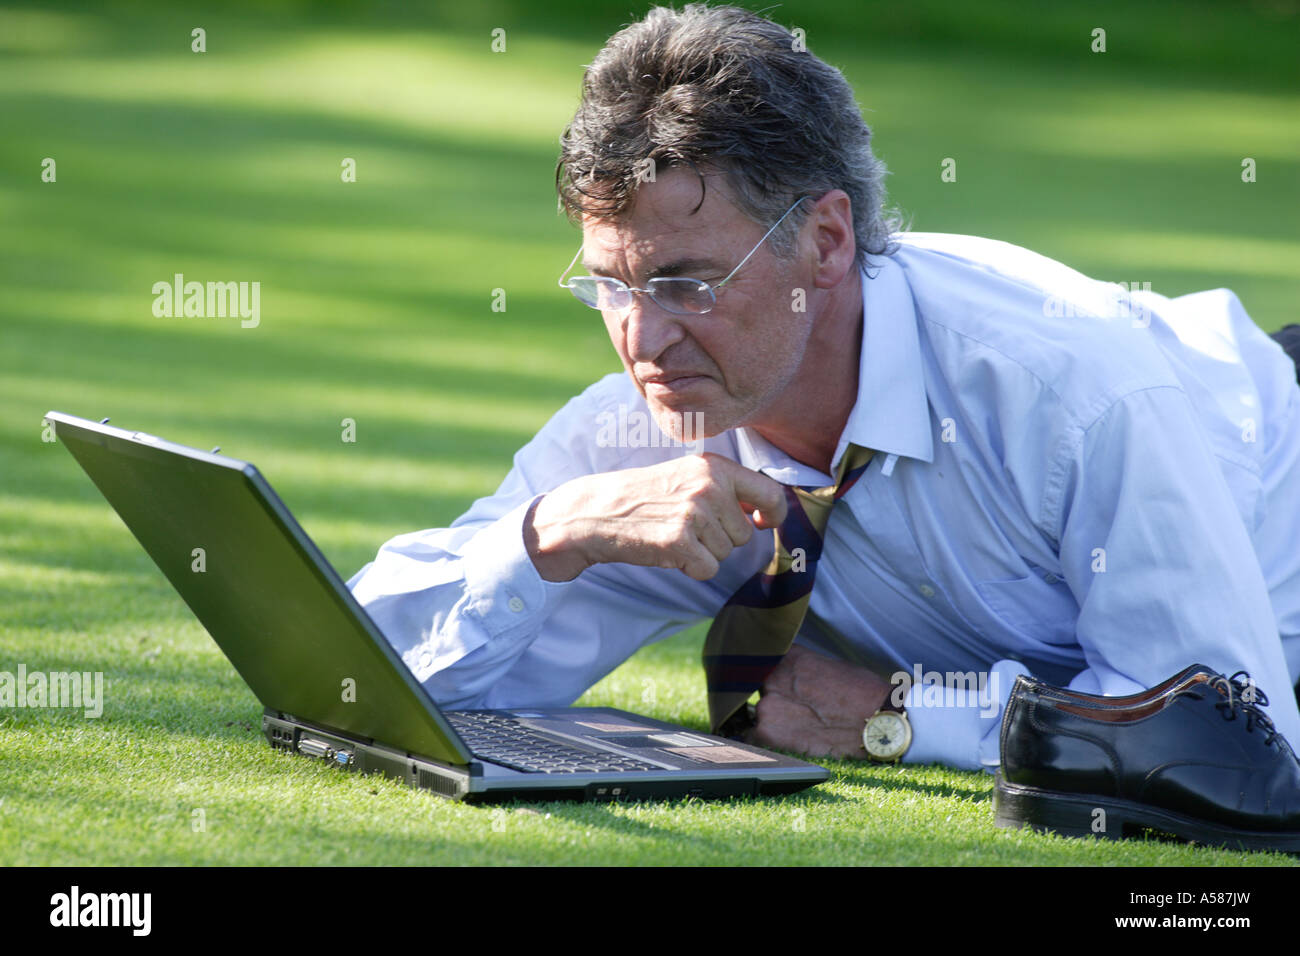 Manager working on notebook in parc Stock Photo